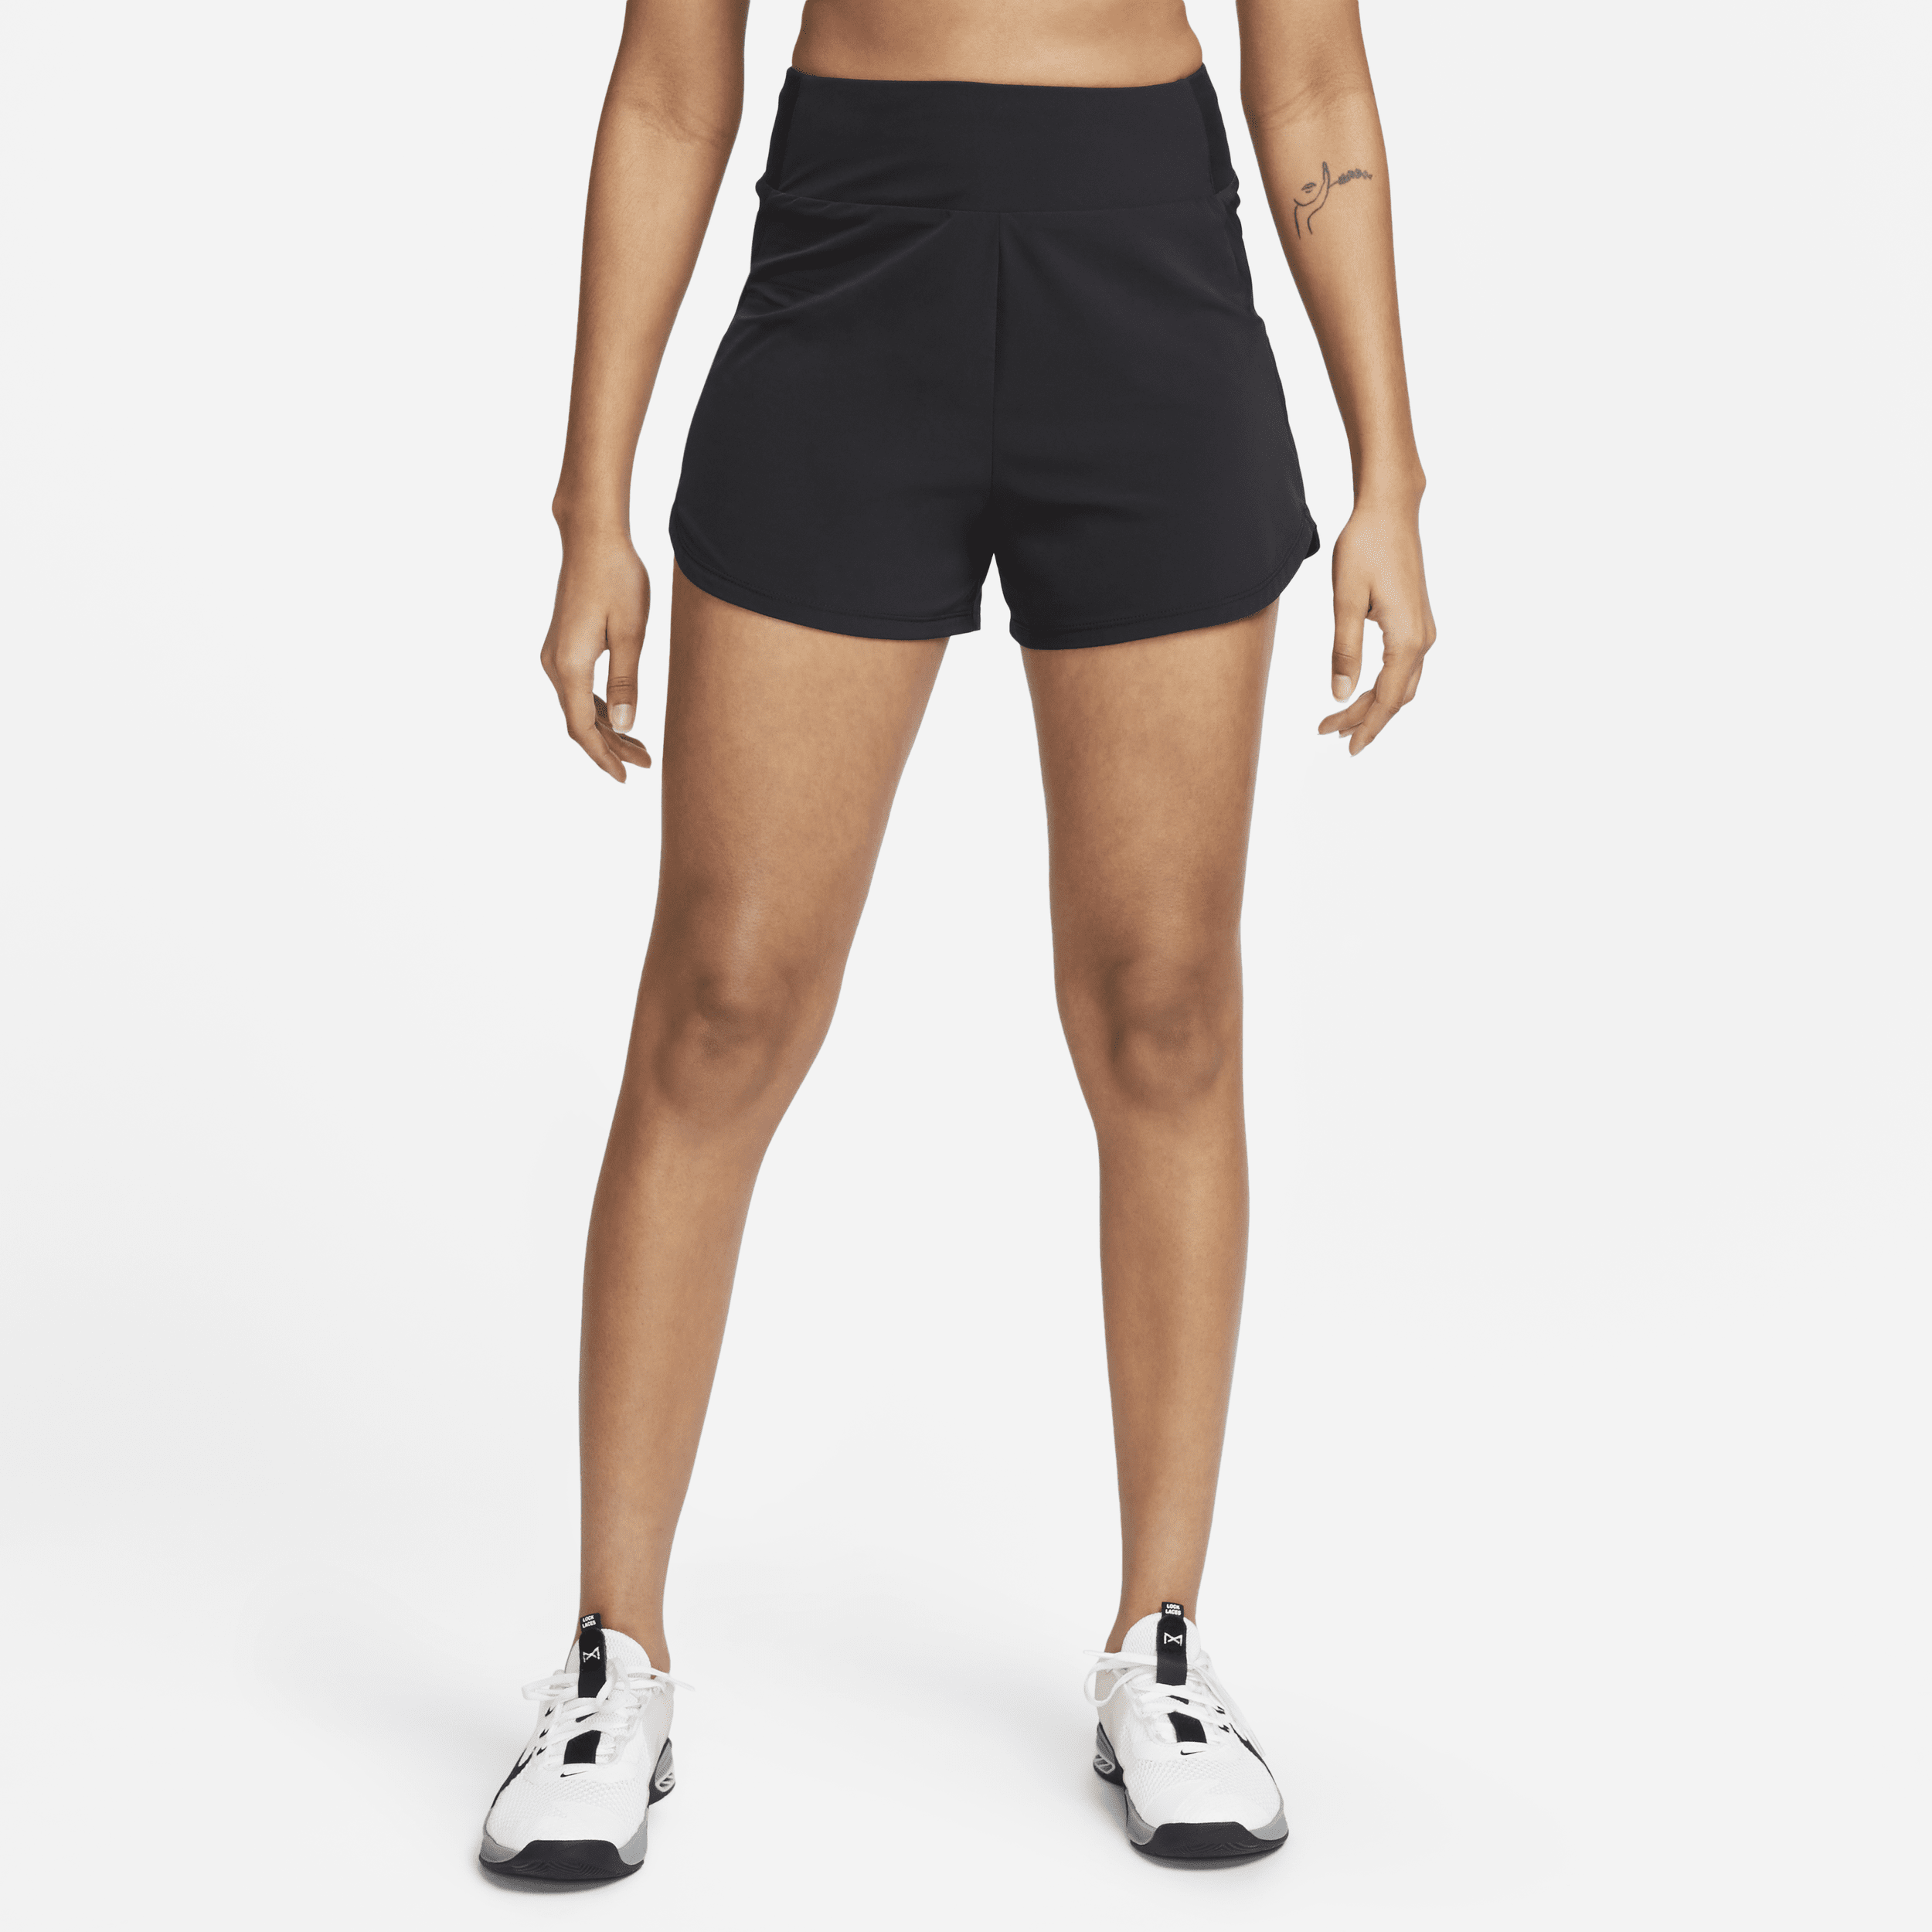 NIKE WOMEN'S BLISS DRI-FIT FITNESS HIGH-WAISTED 3" BRIEF-LINED SHORTS,1008061544